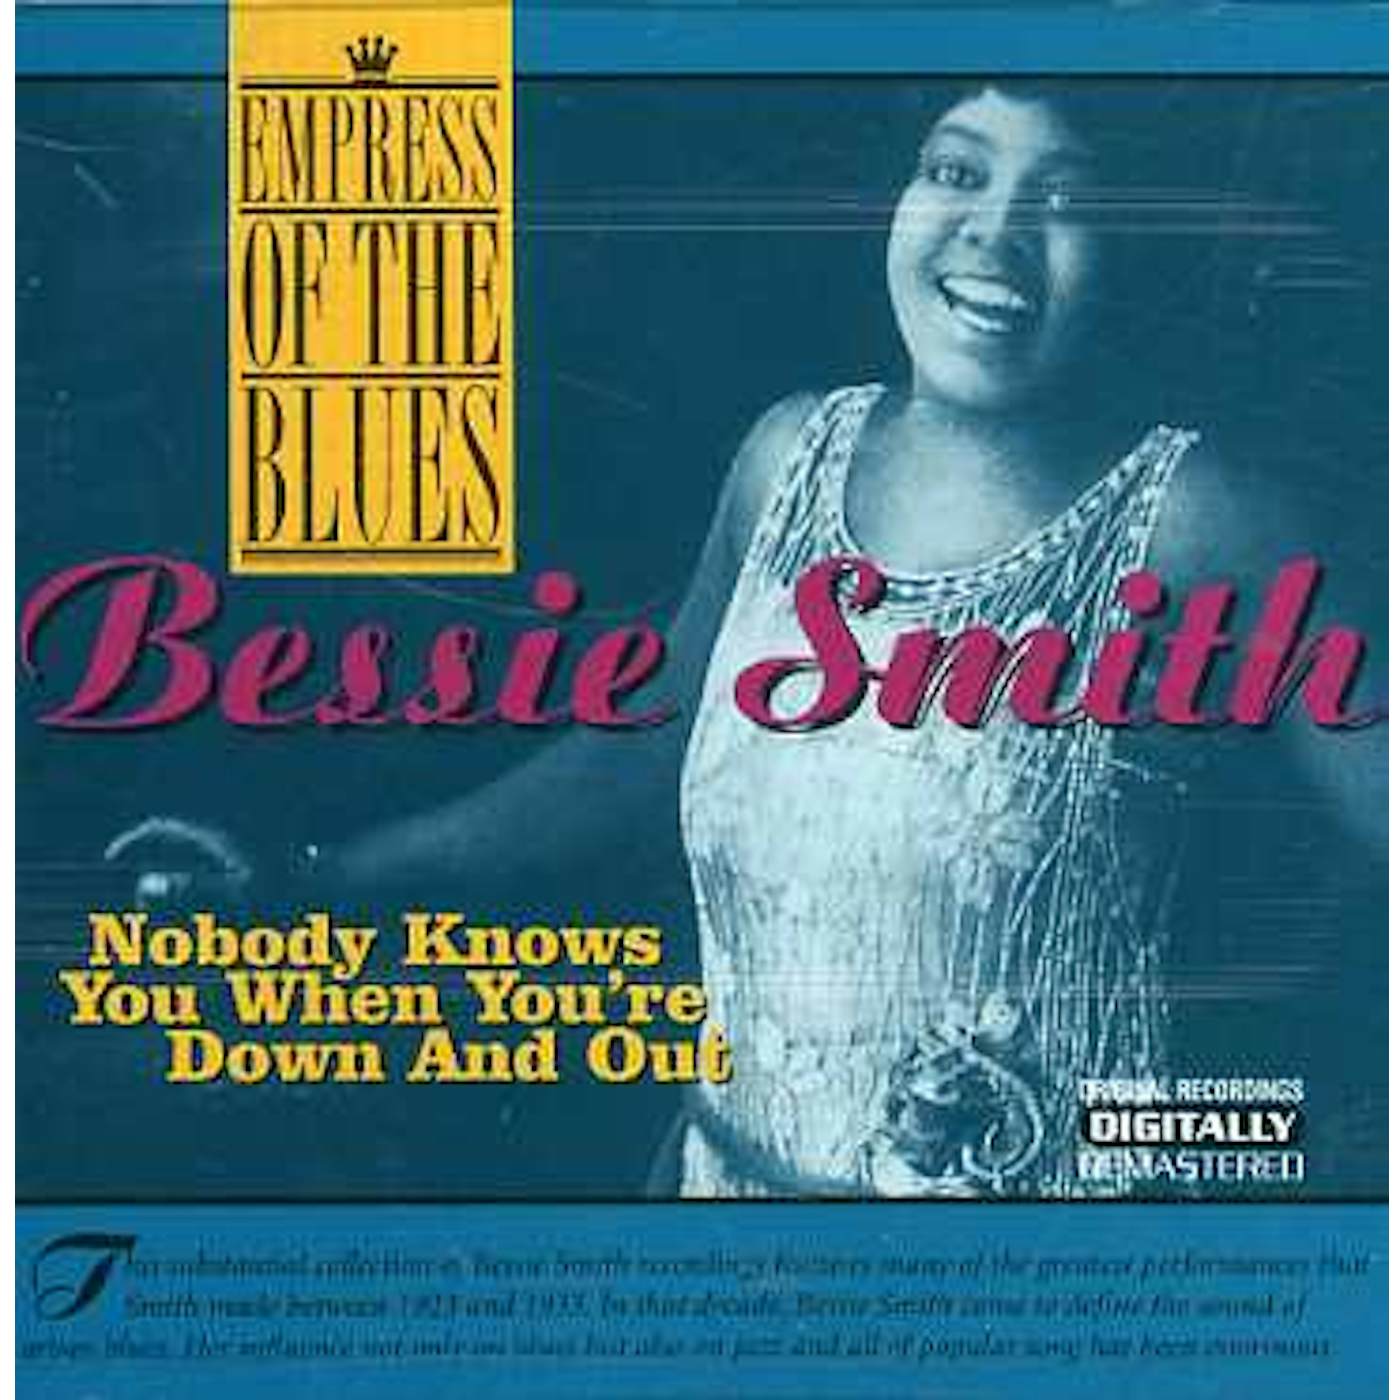 Bessie Smith NOBODY KNOWS YOU WHEM YOURE DOWN & OUT CD